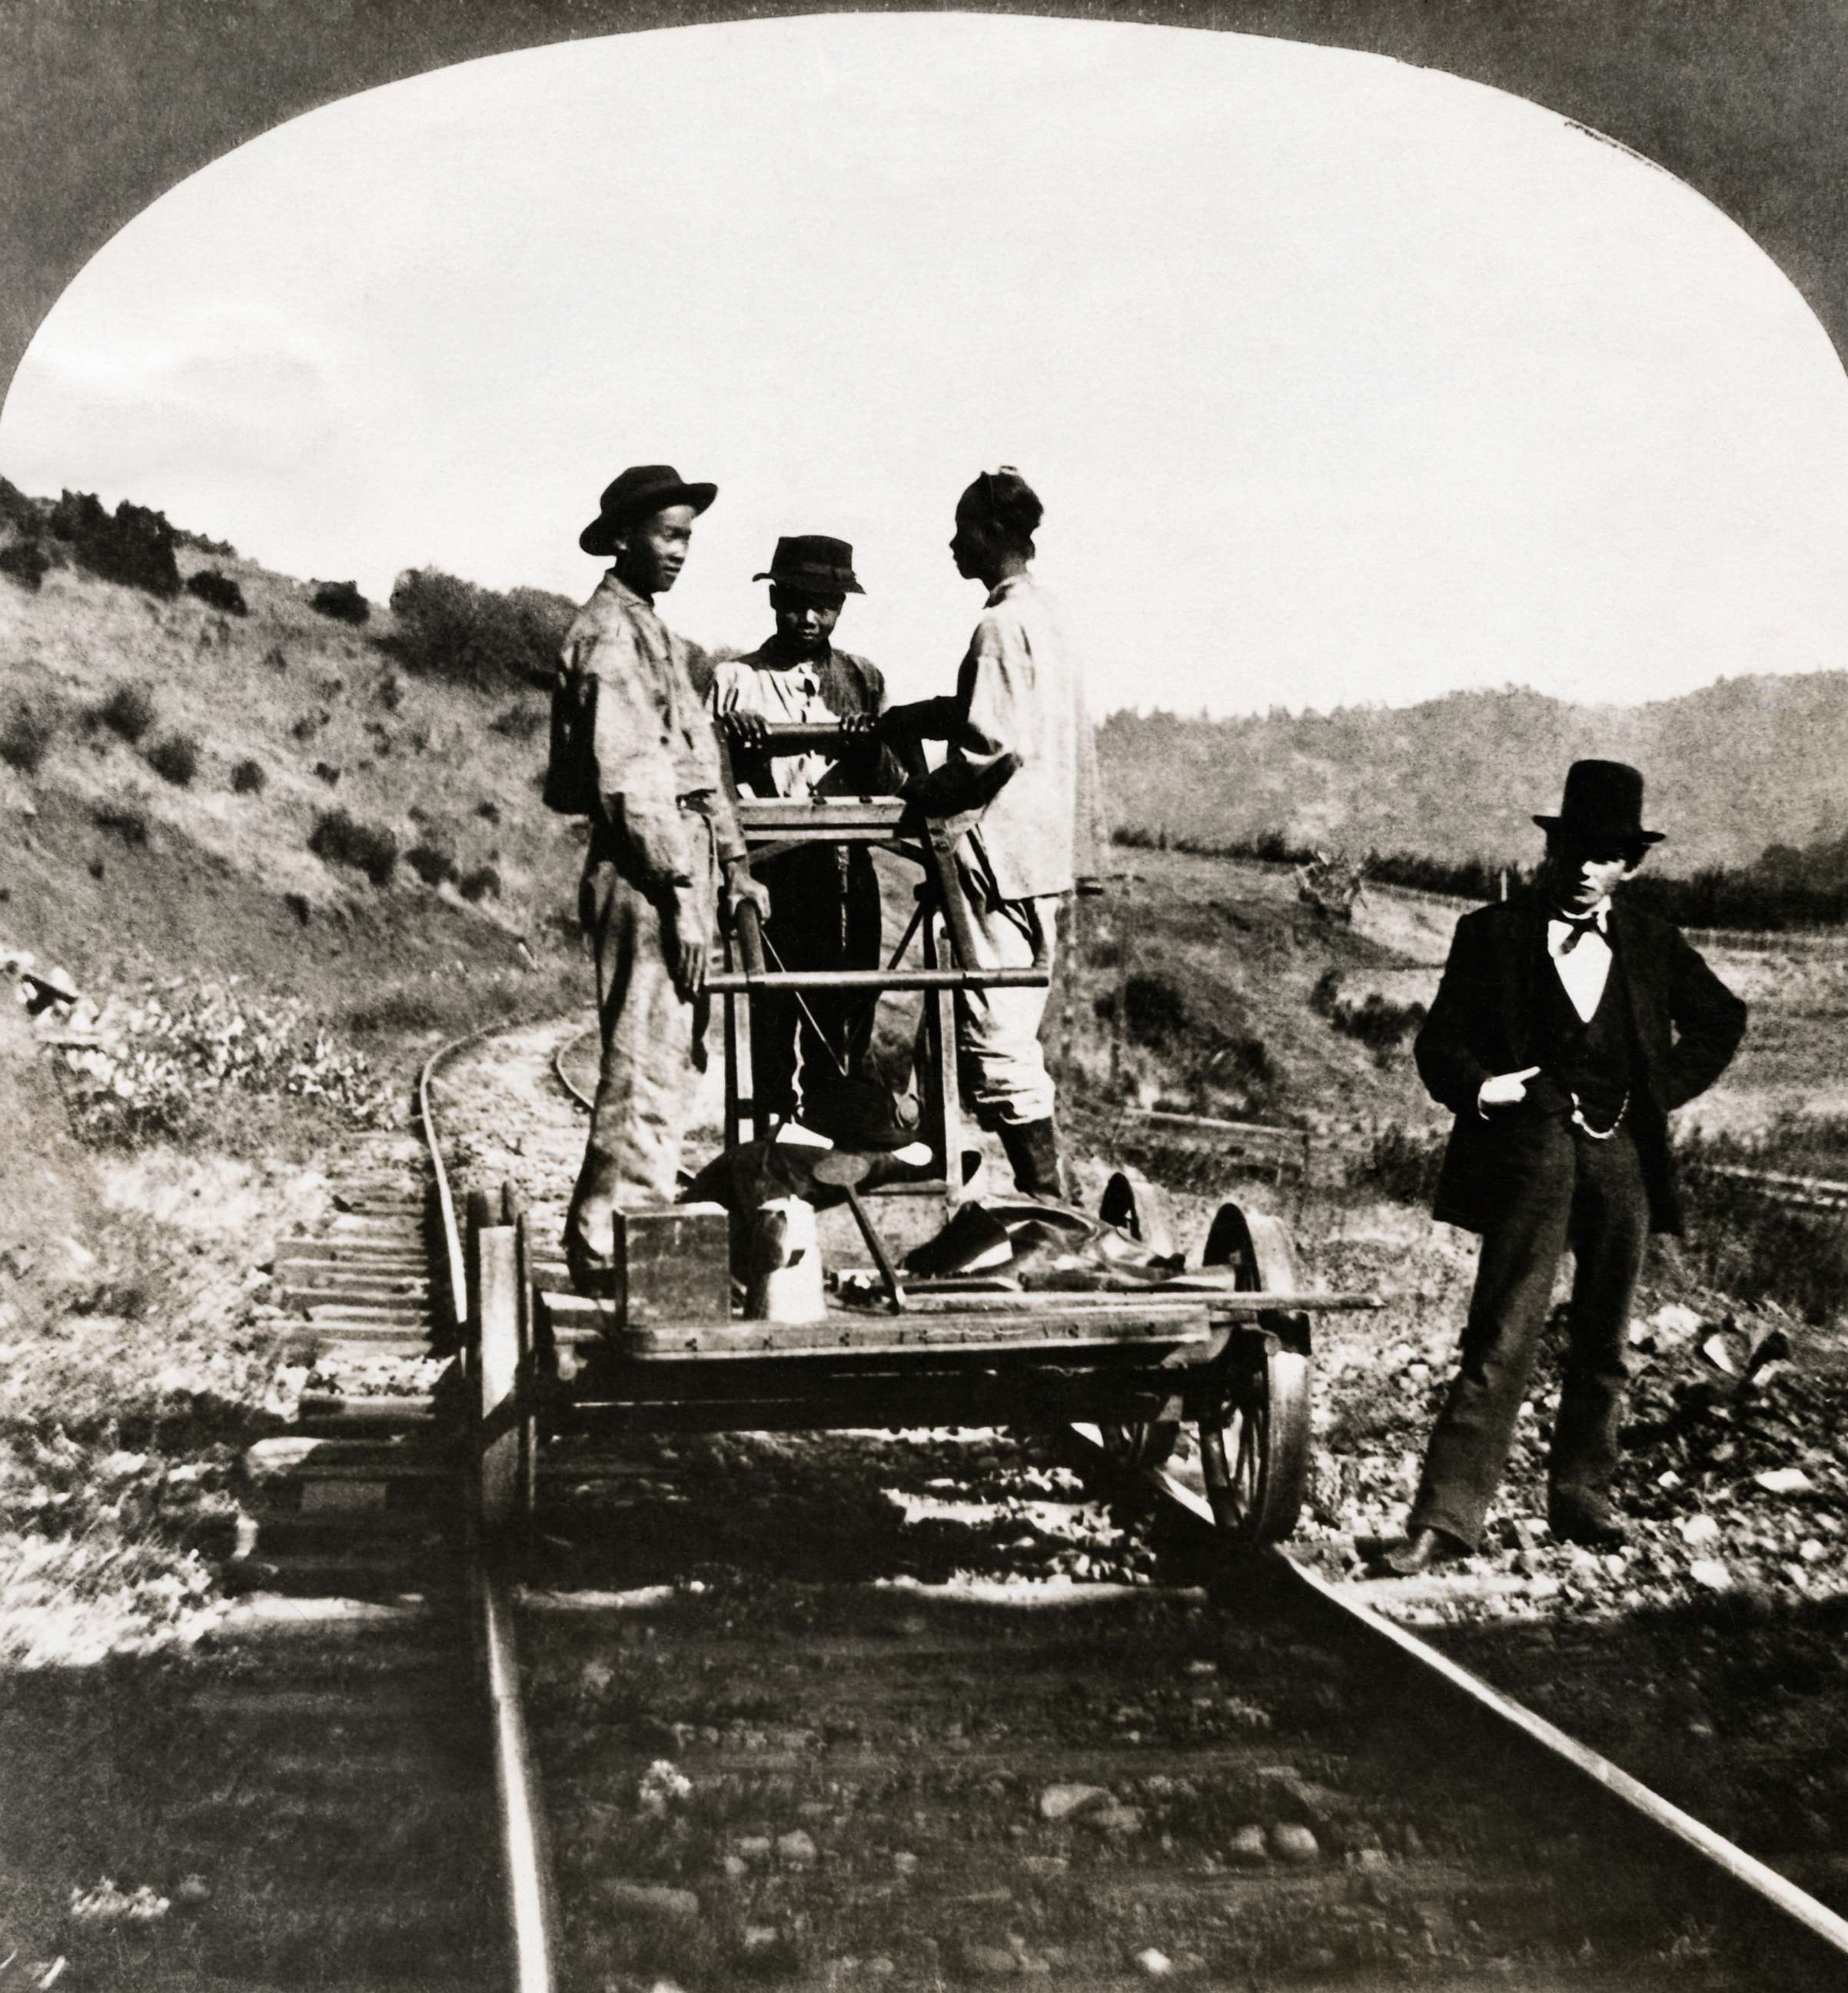 PHOTO: In early California, thousands of Chinese immigrants were employed by the railroads to do the toughest work.